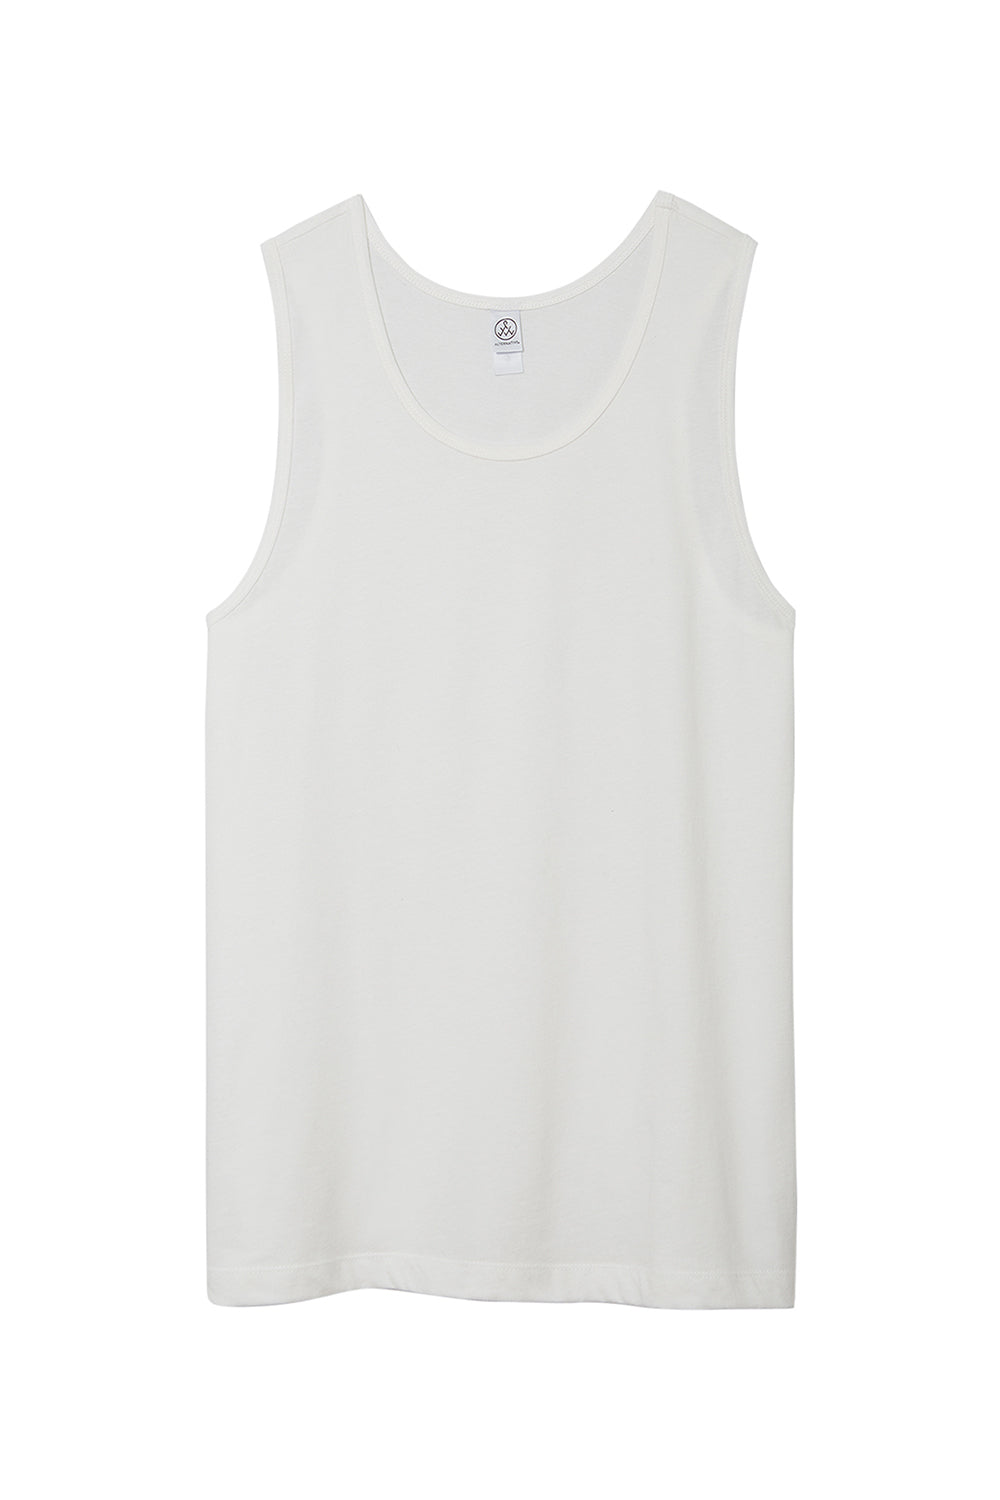 Alternative 1091C1/1091 Mens Go To Tank Top White Flat Front